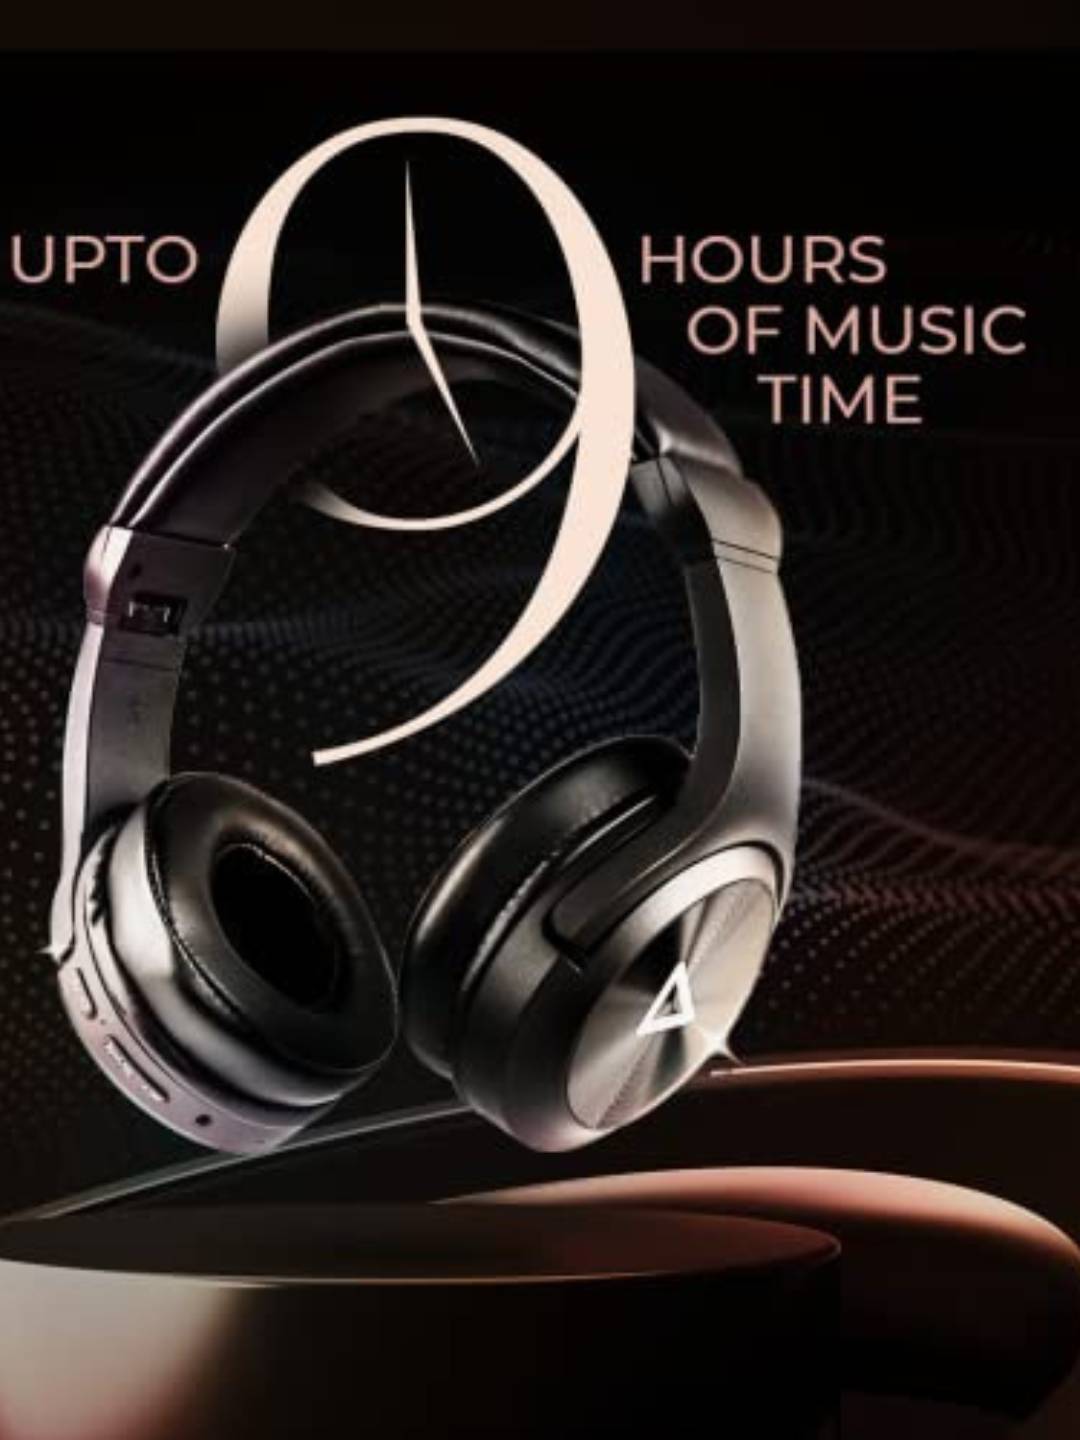 upto 9 hours of music playtime with buzz 101 headphones